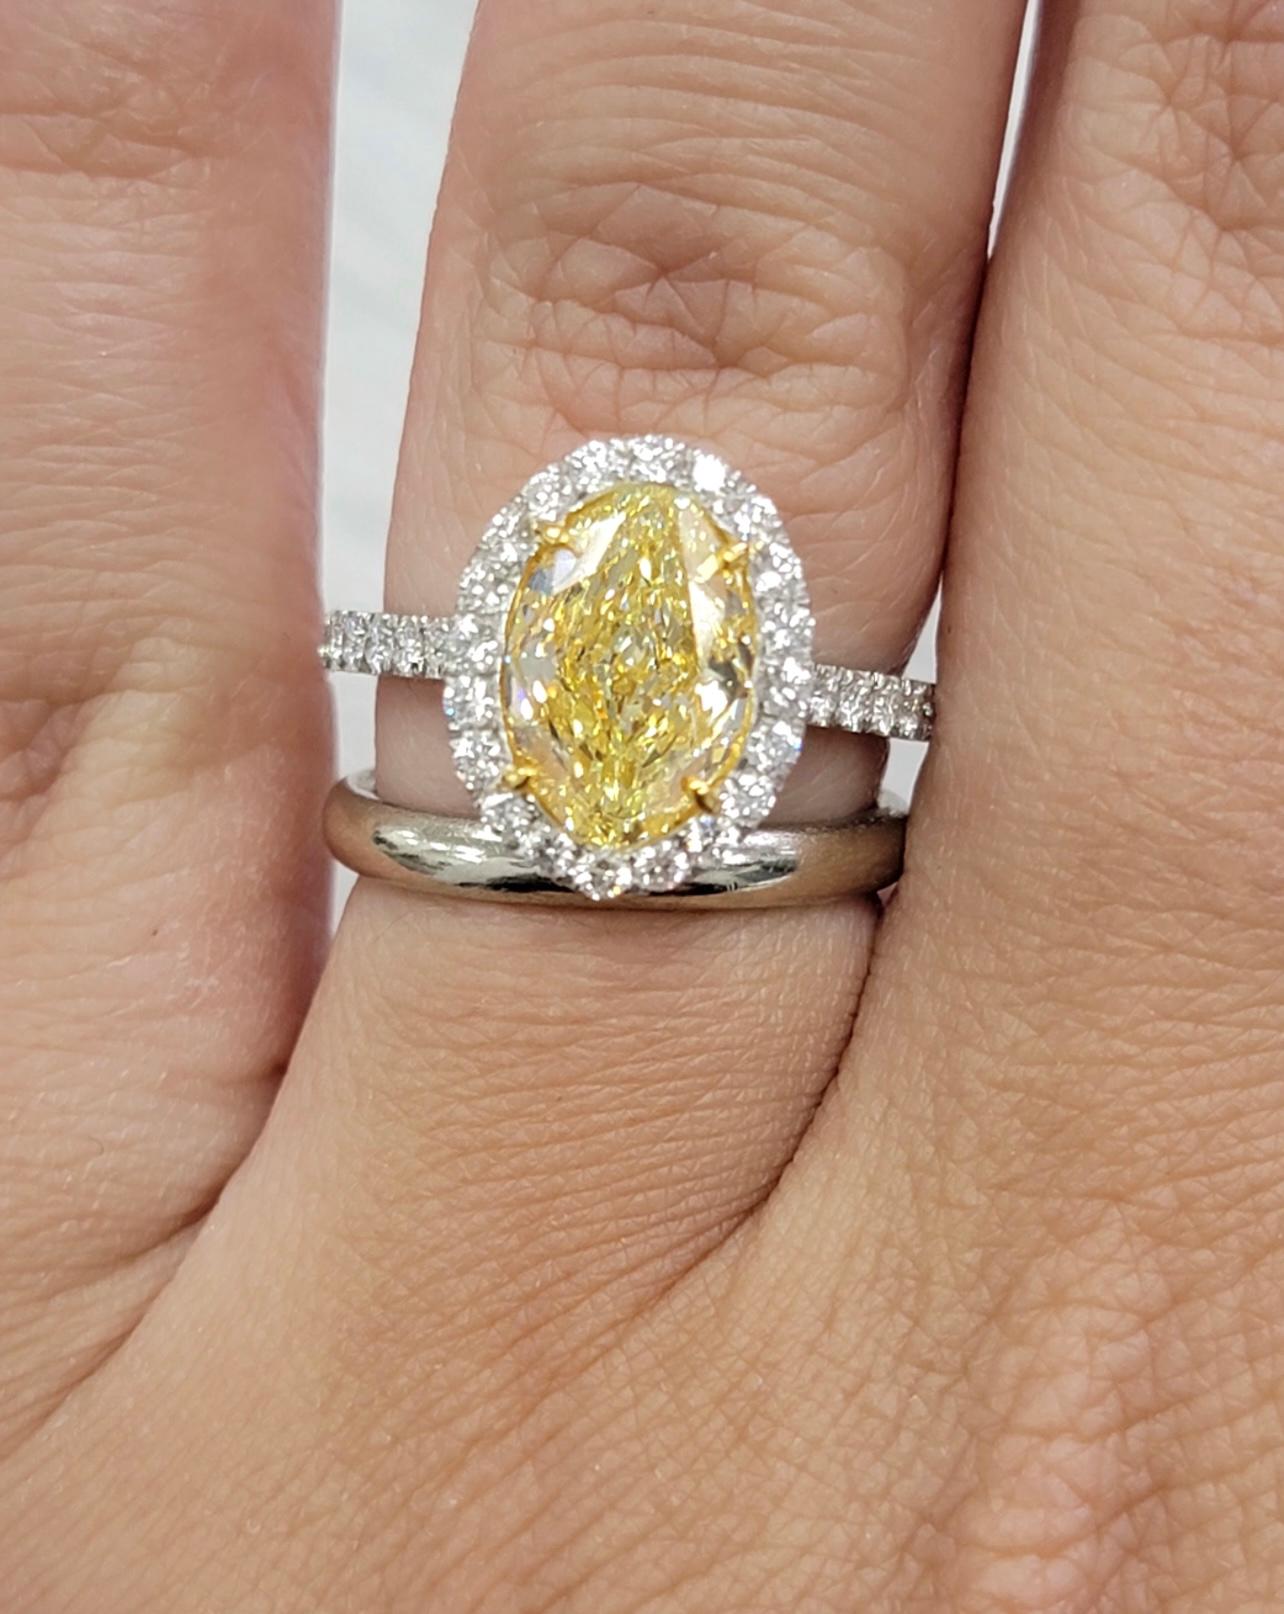 Well cut and proportioned Fancy Yellow Oval
No bow tie and 100% eye clean
Set in platinum and 18kt Yellow Gold with 0.80ct of white diamond melee